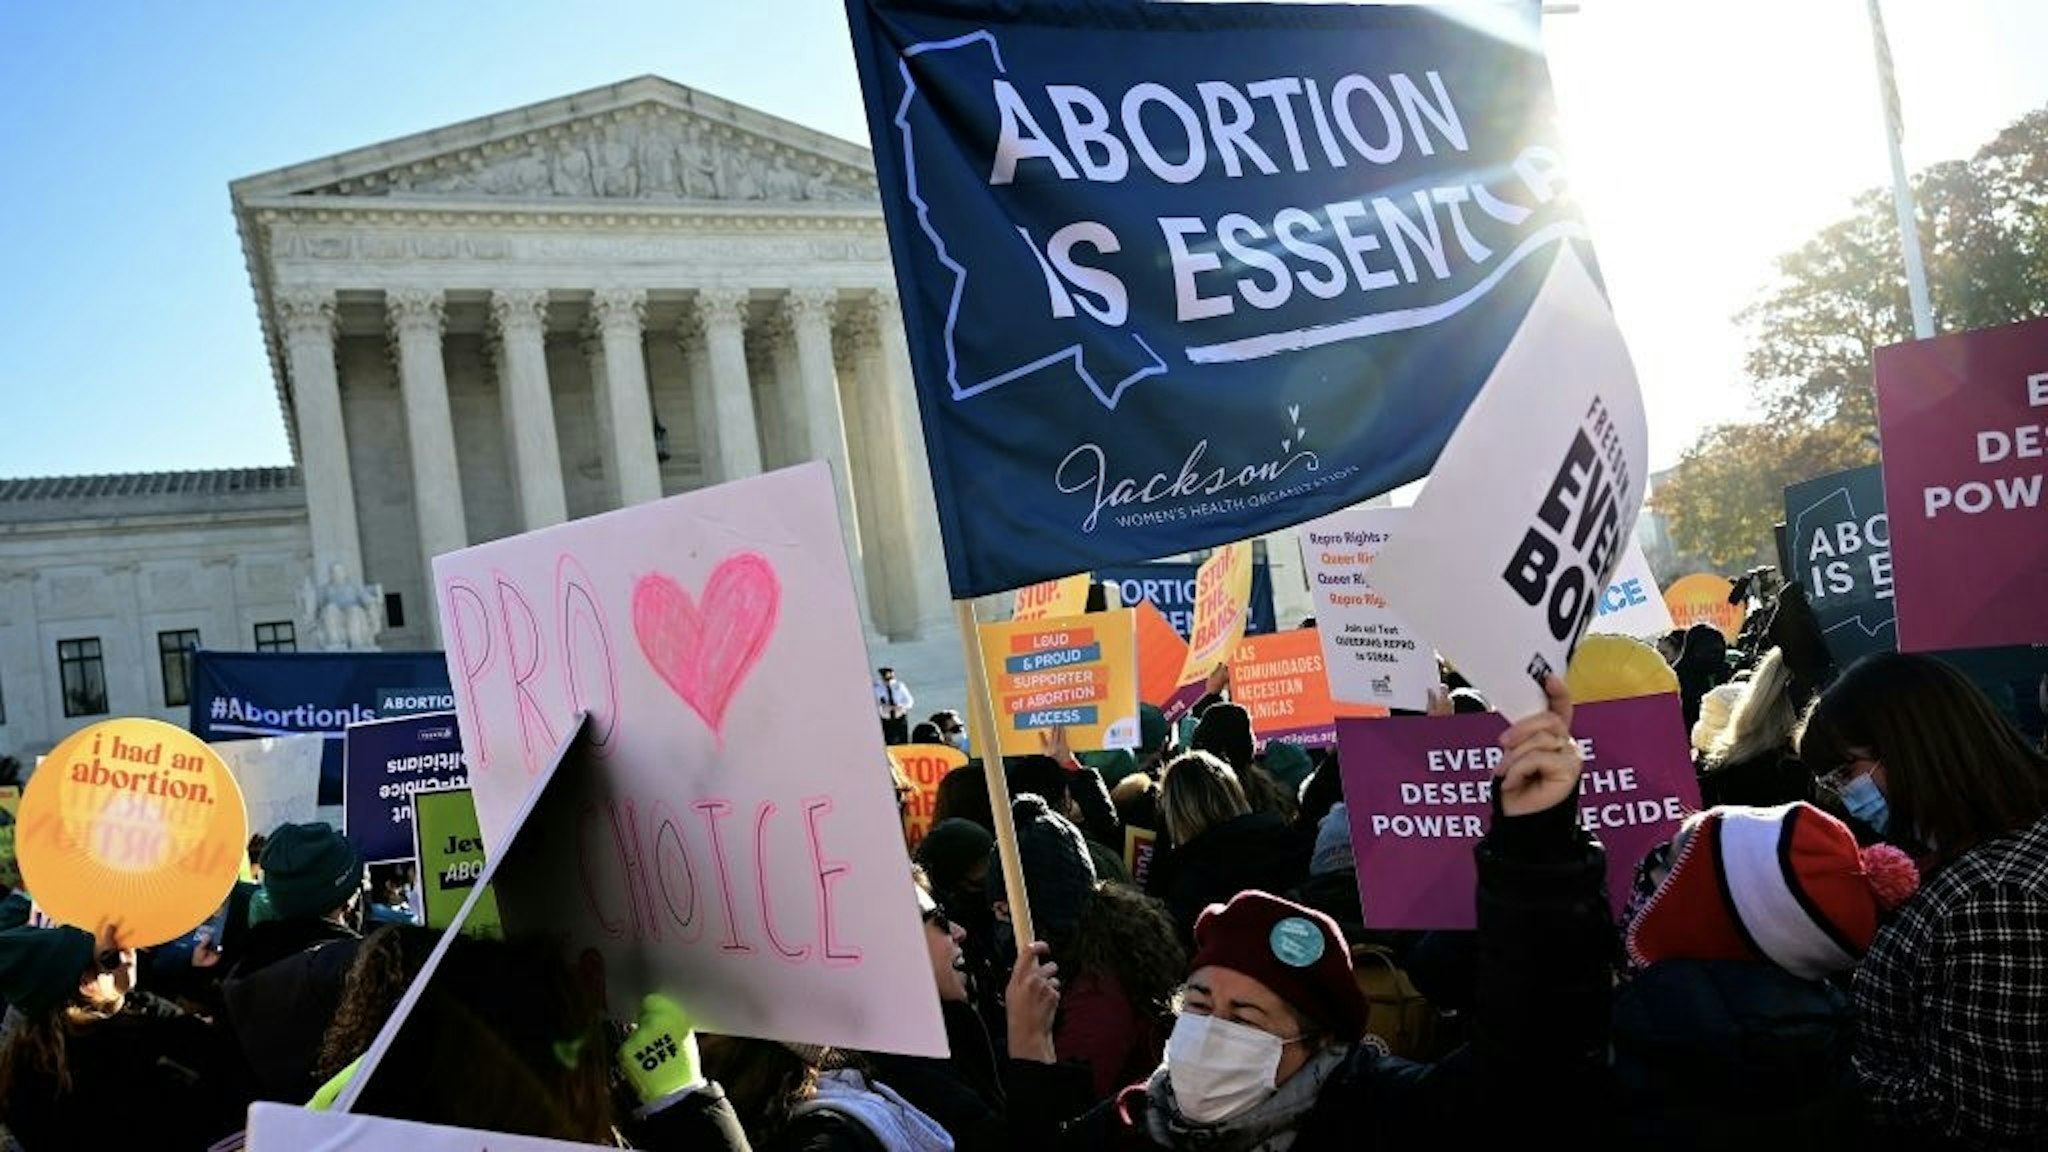 US-rights-abortion-politics-health Abortion rights advocates and anti-abortion protesters demonstrate in front of the US Supreme Court in Washington, DC, on December 1, 2021. - The justices weigh whether to uphold a Mississippi law that bans abortion after 15 weeks and overrule the 1973 Roe v. Wade decision. (Photo by Jim WATSON / AFP) (Photo by JIM WATSON/AFP via Getty Images) JIM WATSON / Contributor